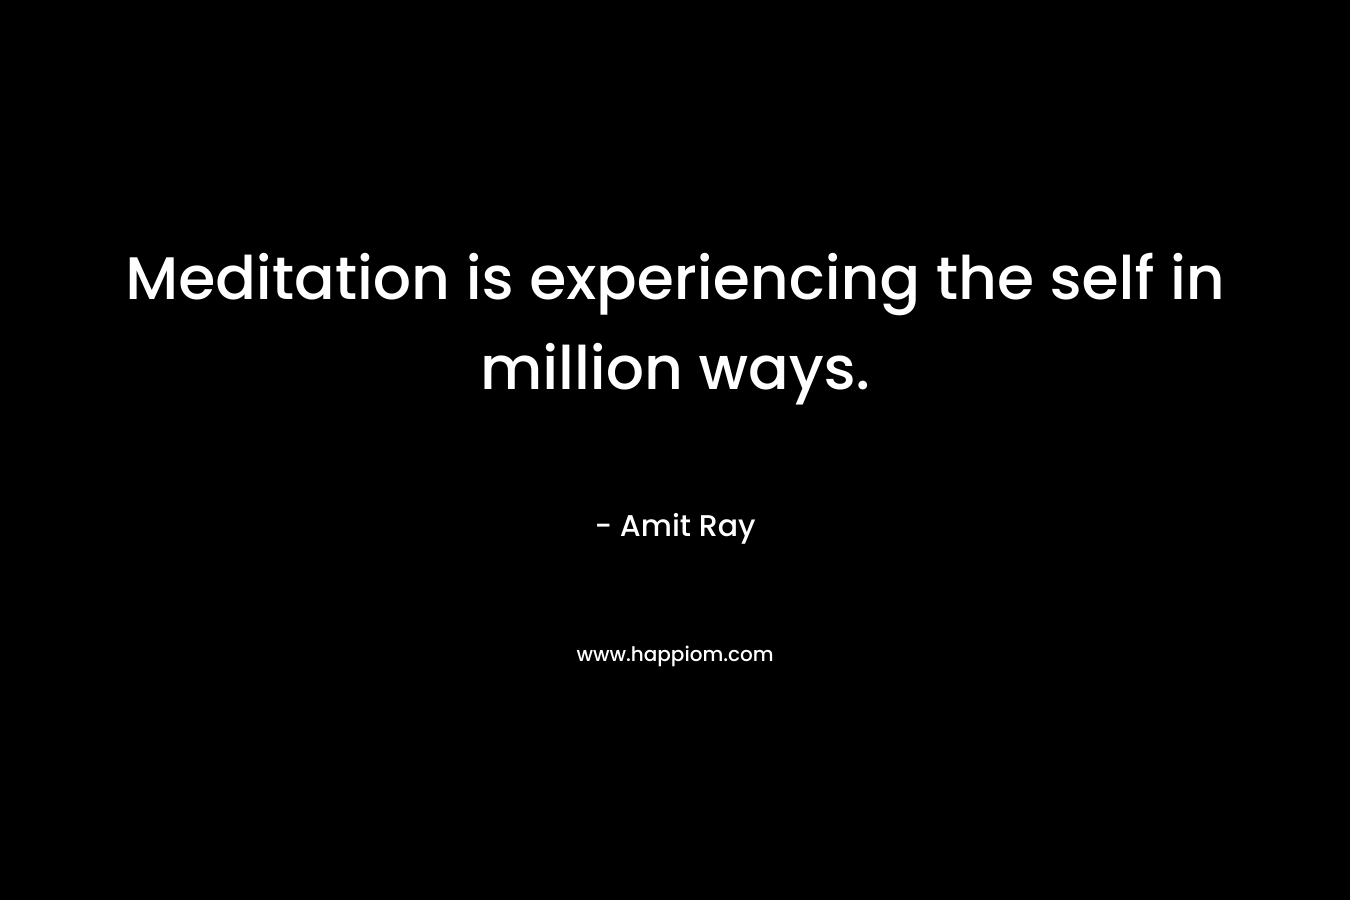 Meditation is experiencing the self in million ways.